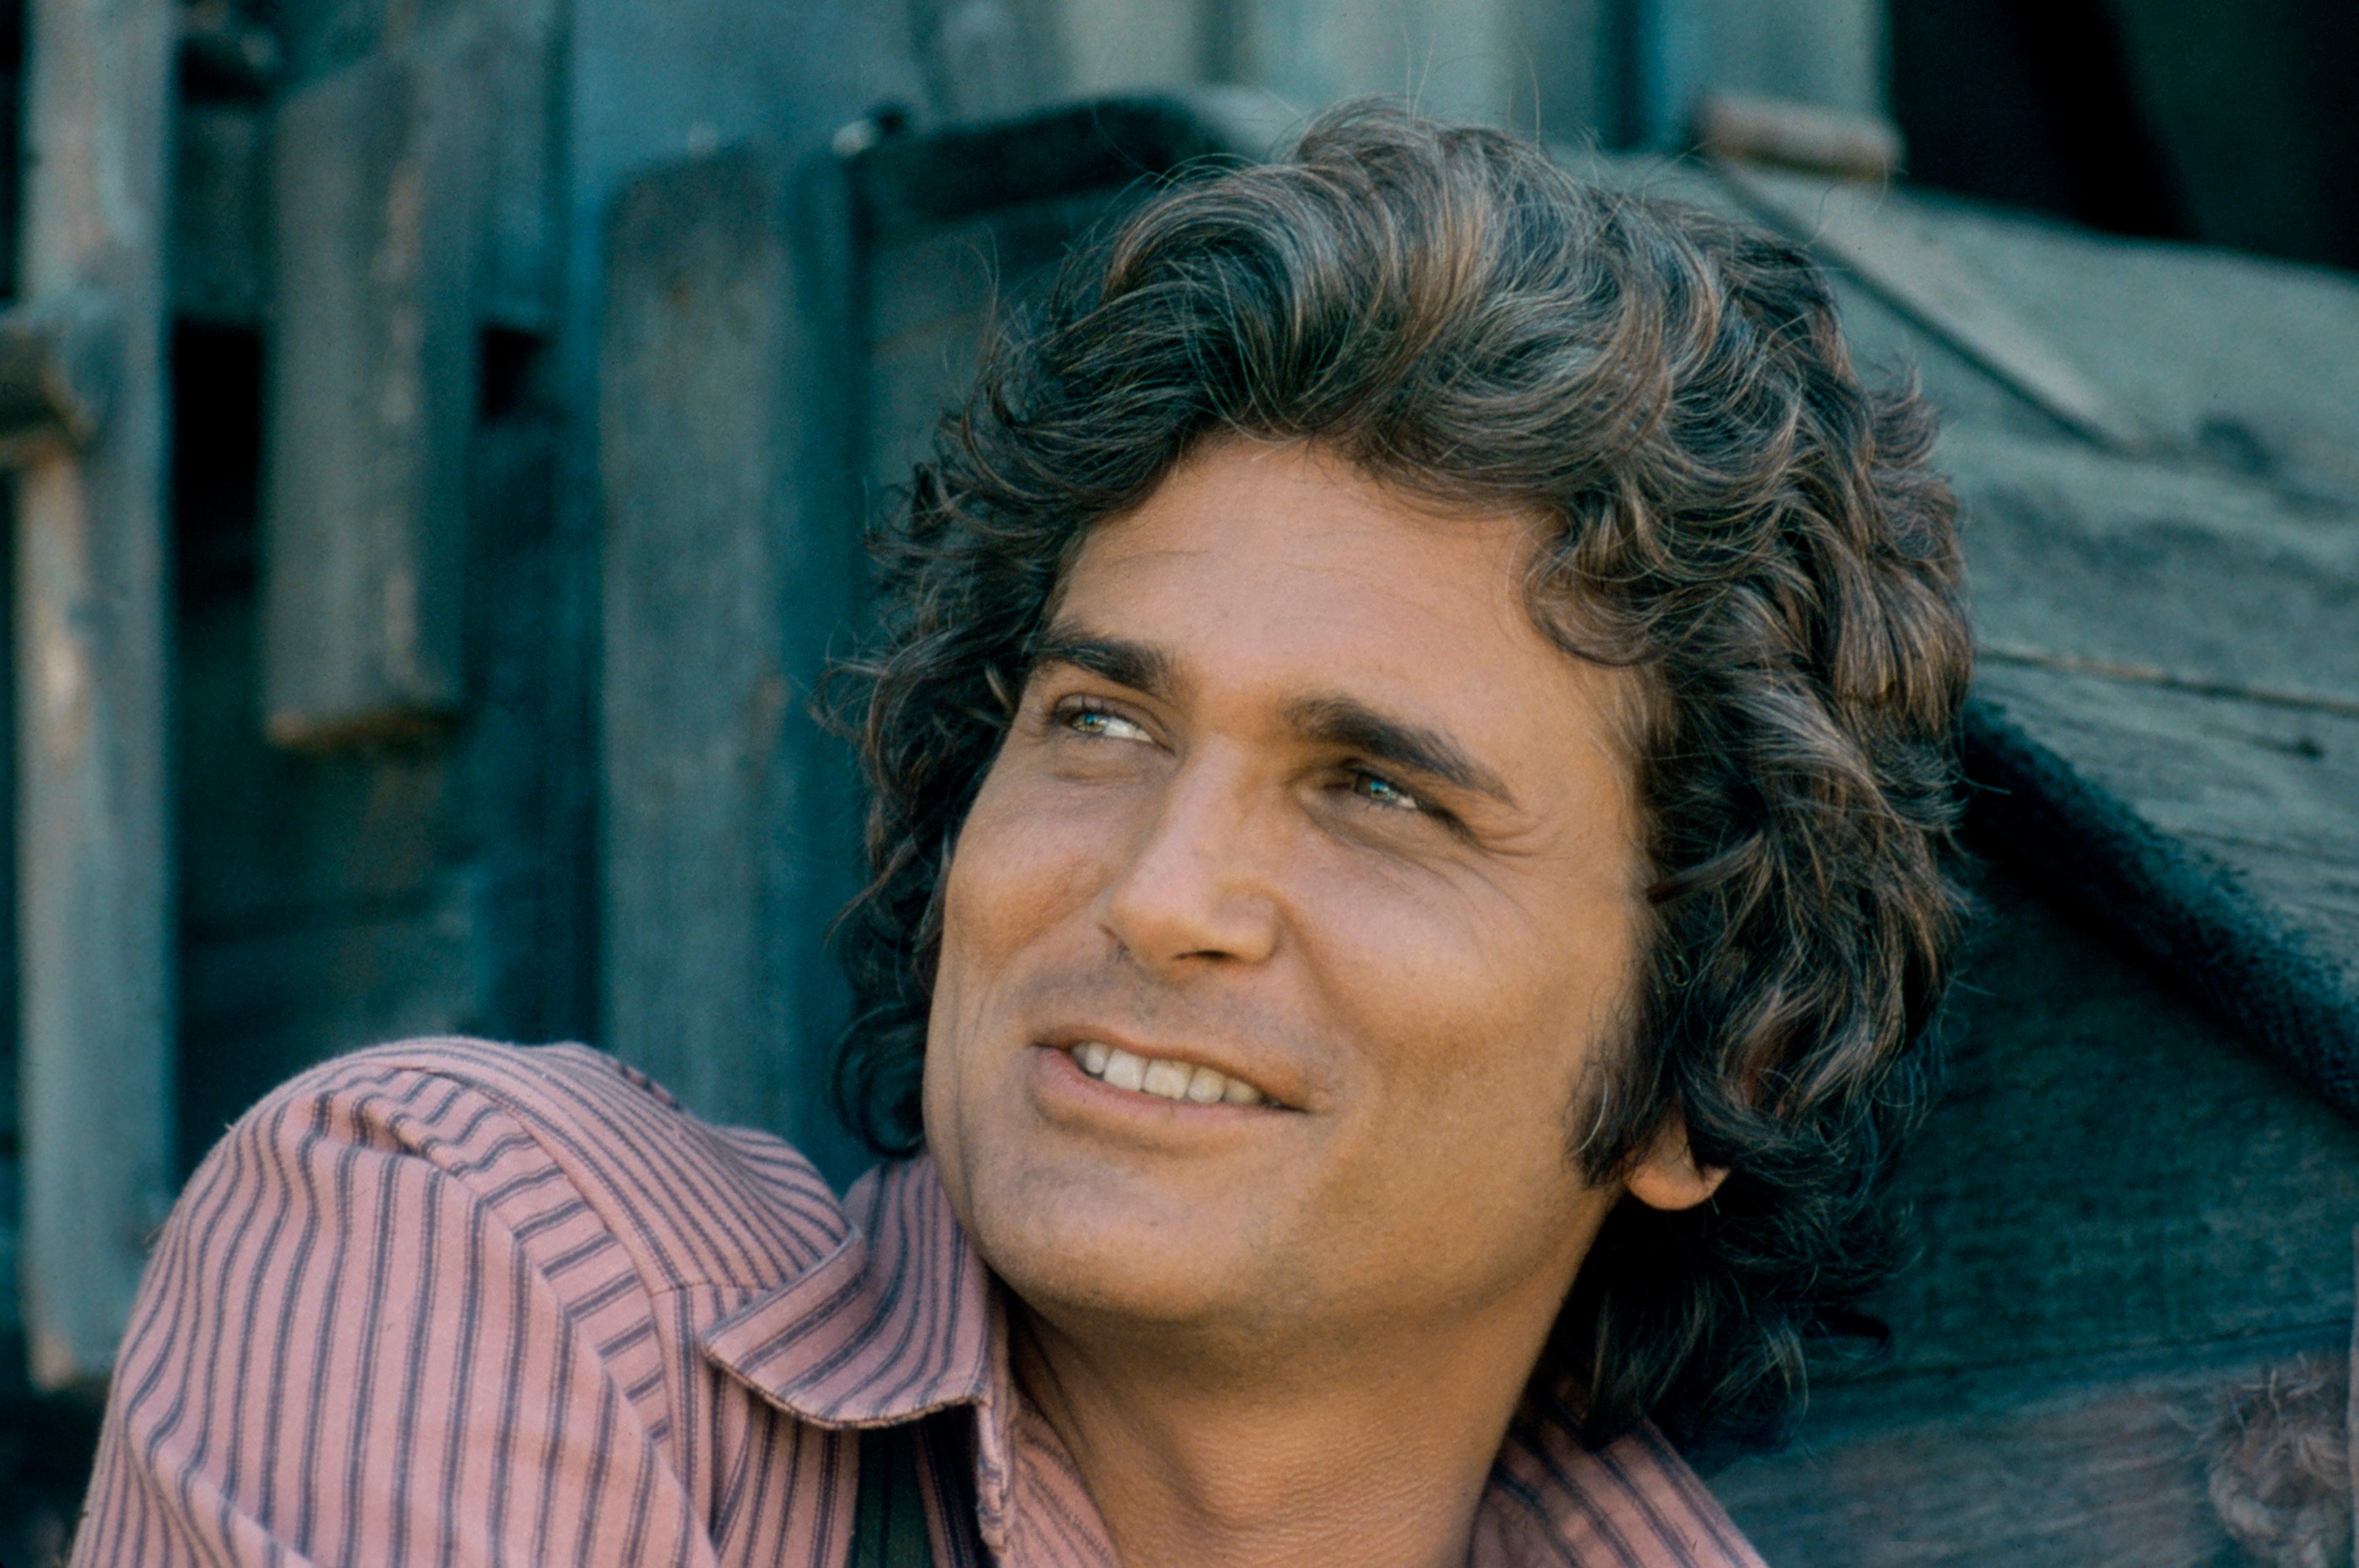 Michael Landon smiles while on the set of Little House on the Prairie.